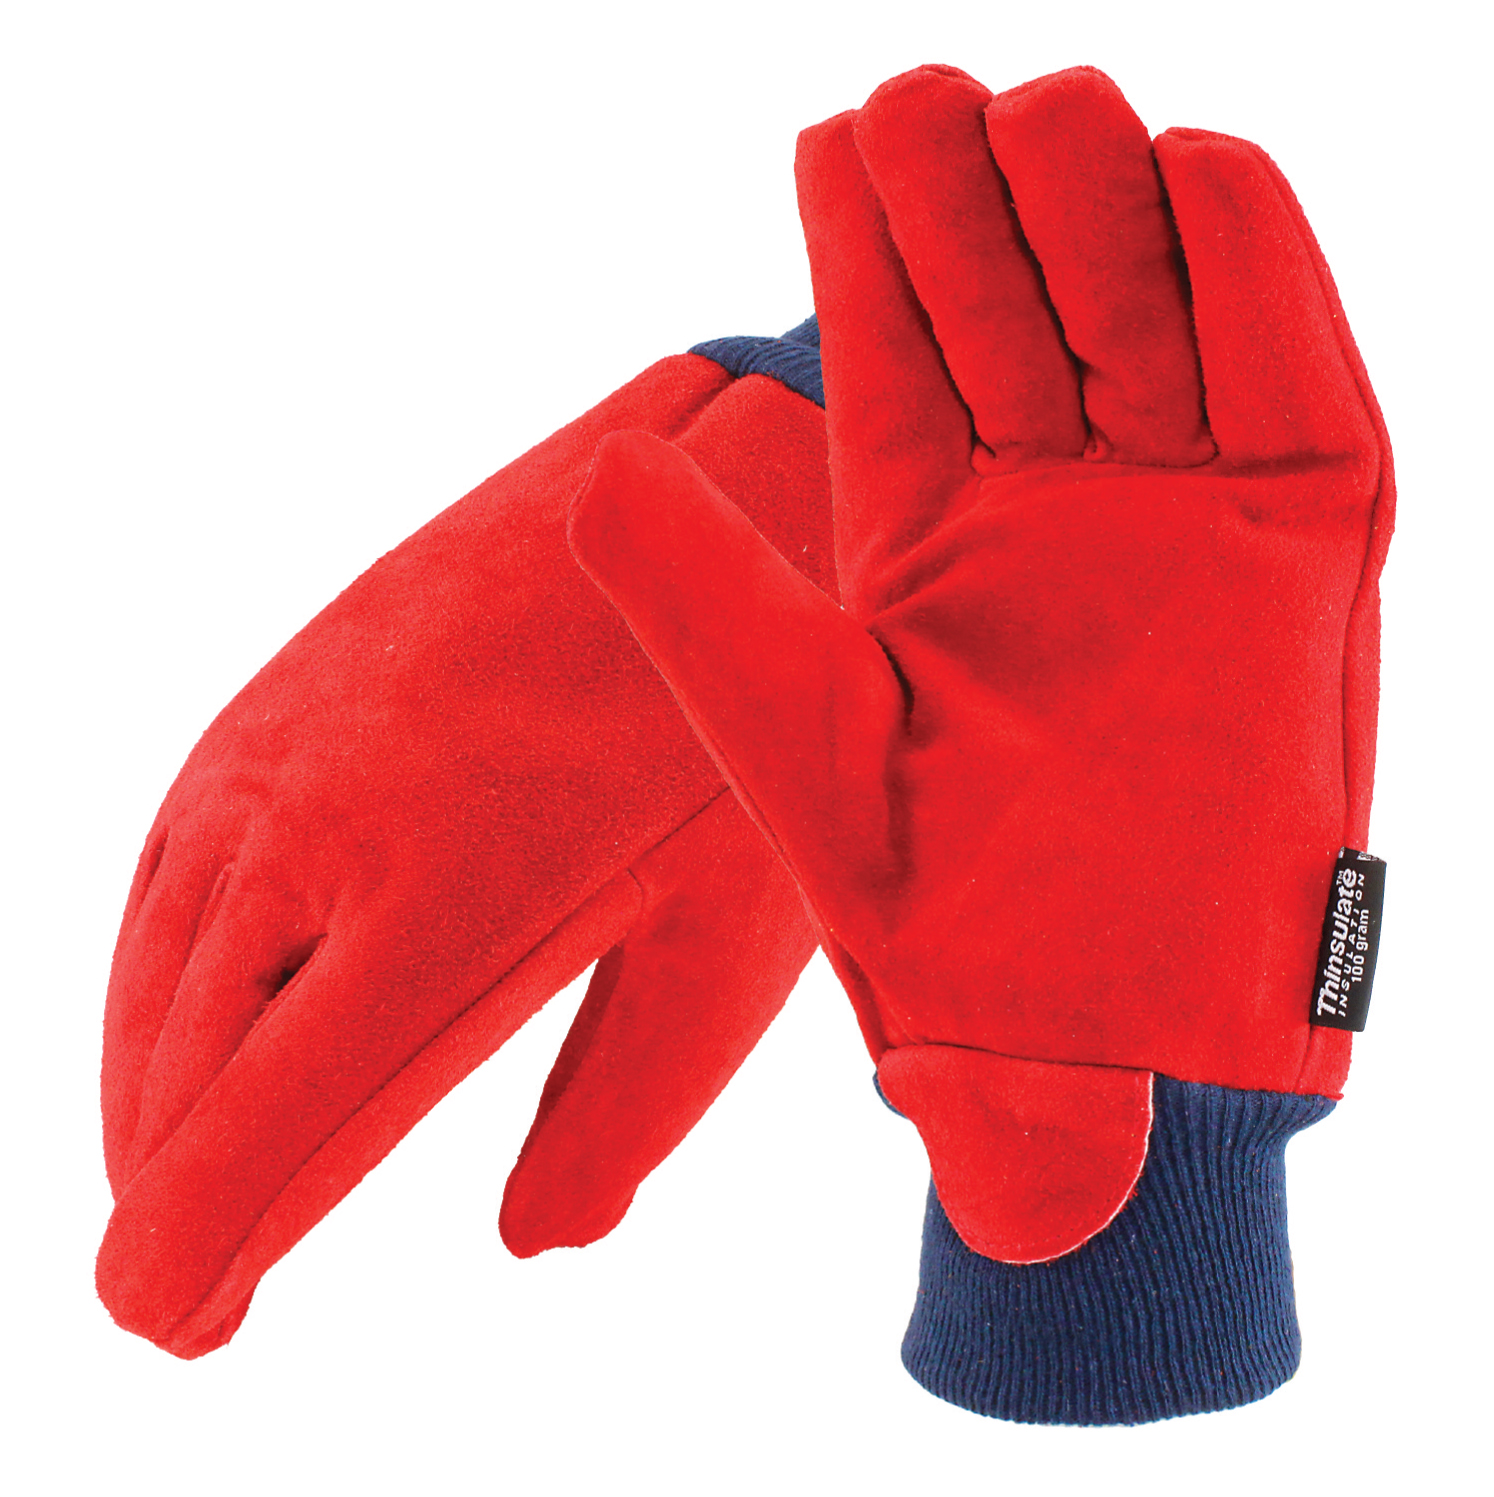 Insulated Leather Freezer Gloves, 1 Pair